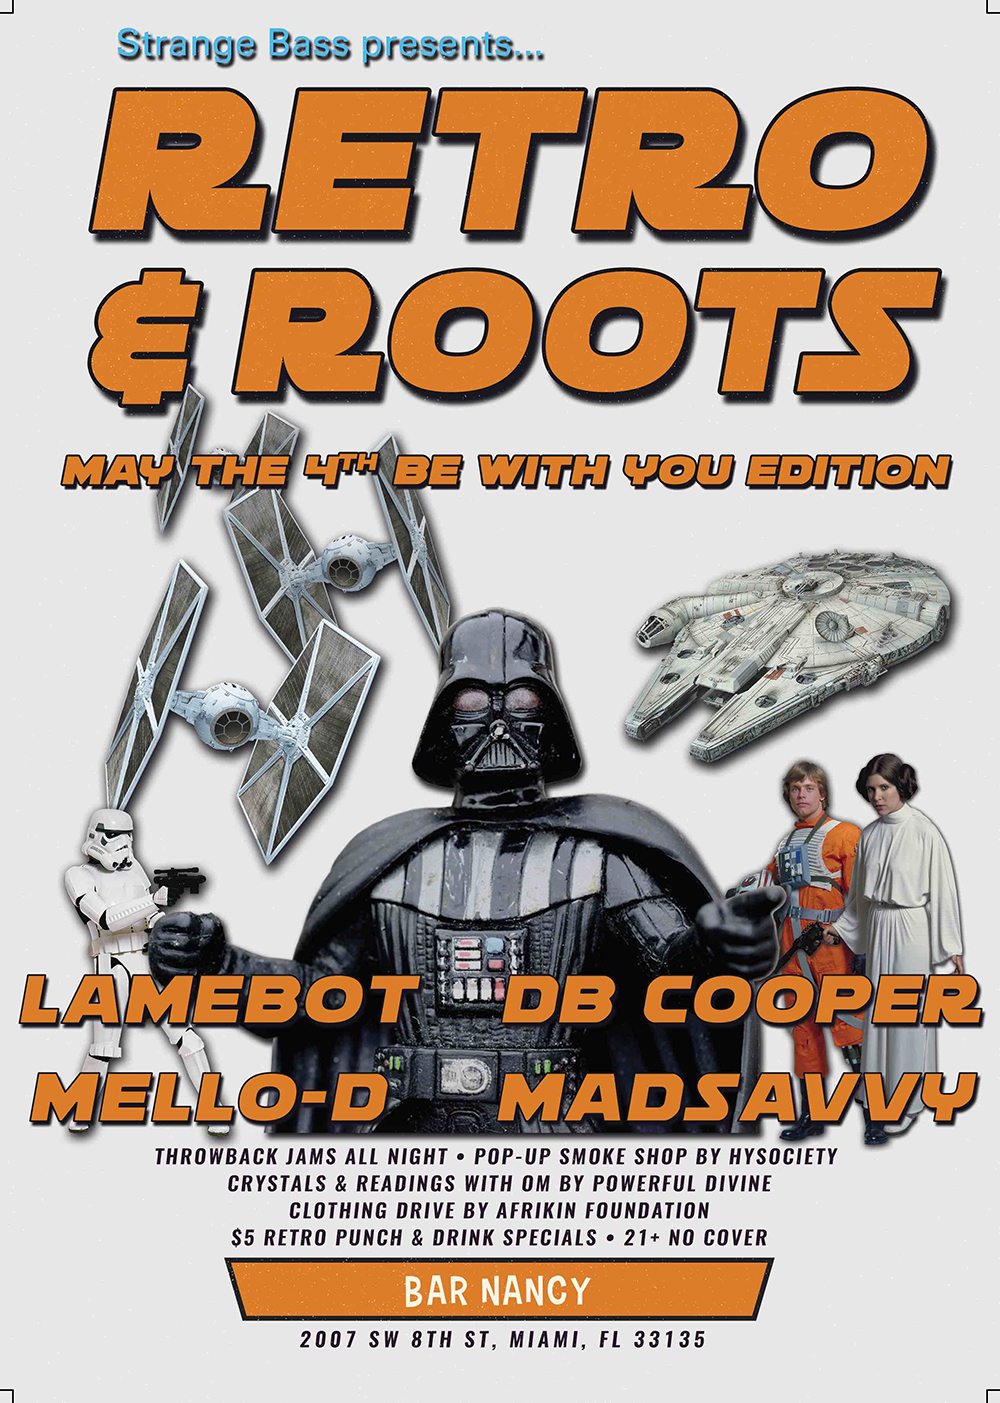 Retro & Roots at Bar Nancy with Lamebot - DB Cooper, Mello D - Madsavvy